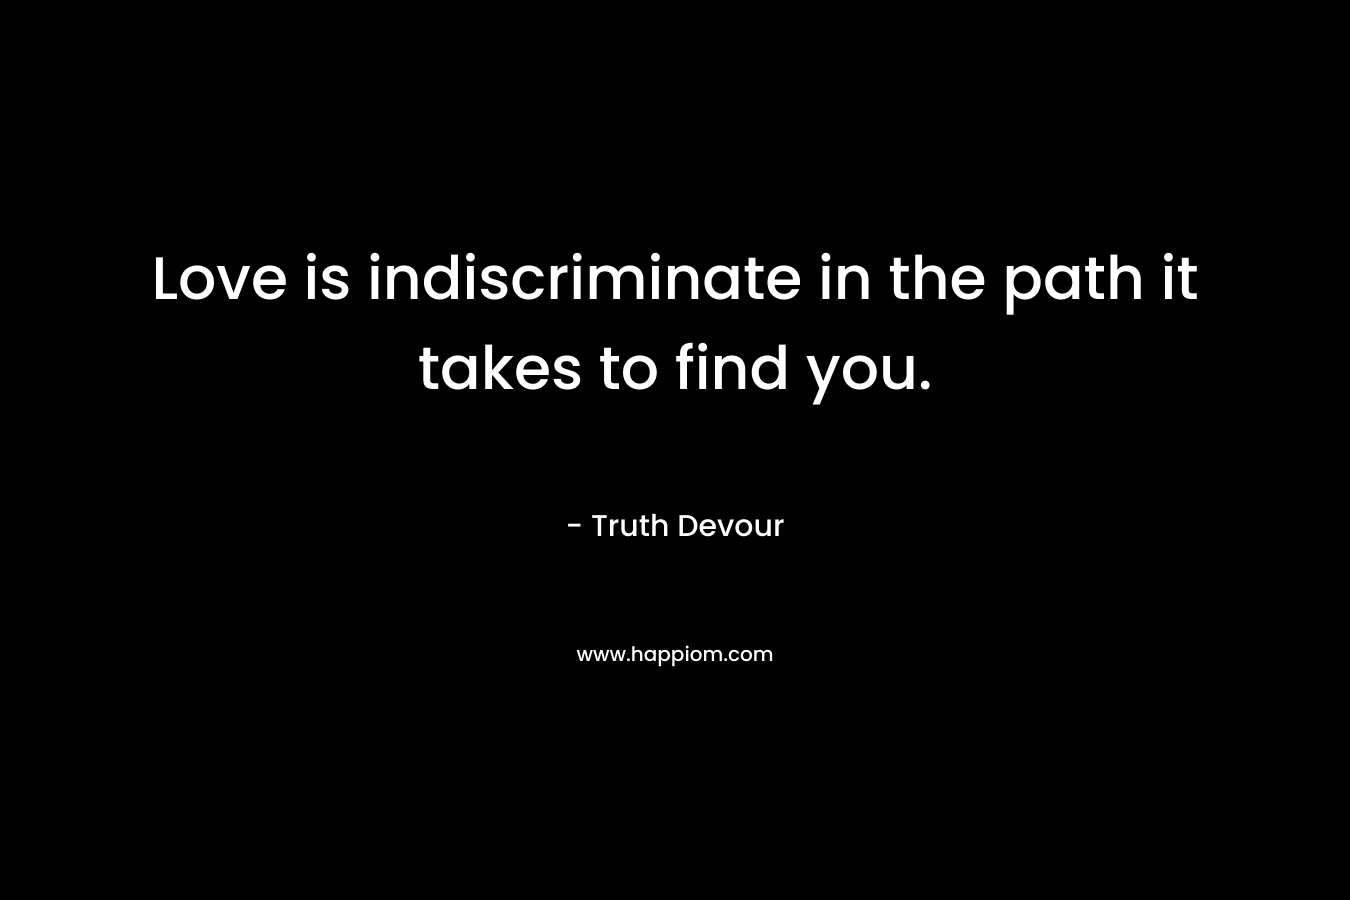 Love is indiscriminate in the path it takes to find you. – Truth Devour